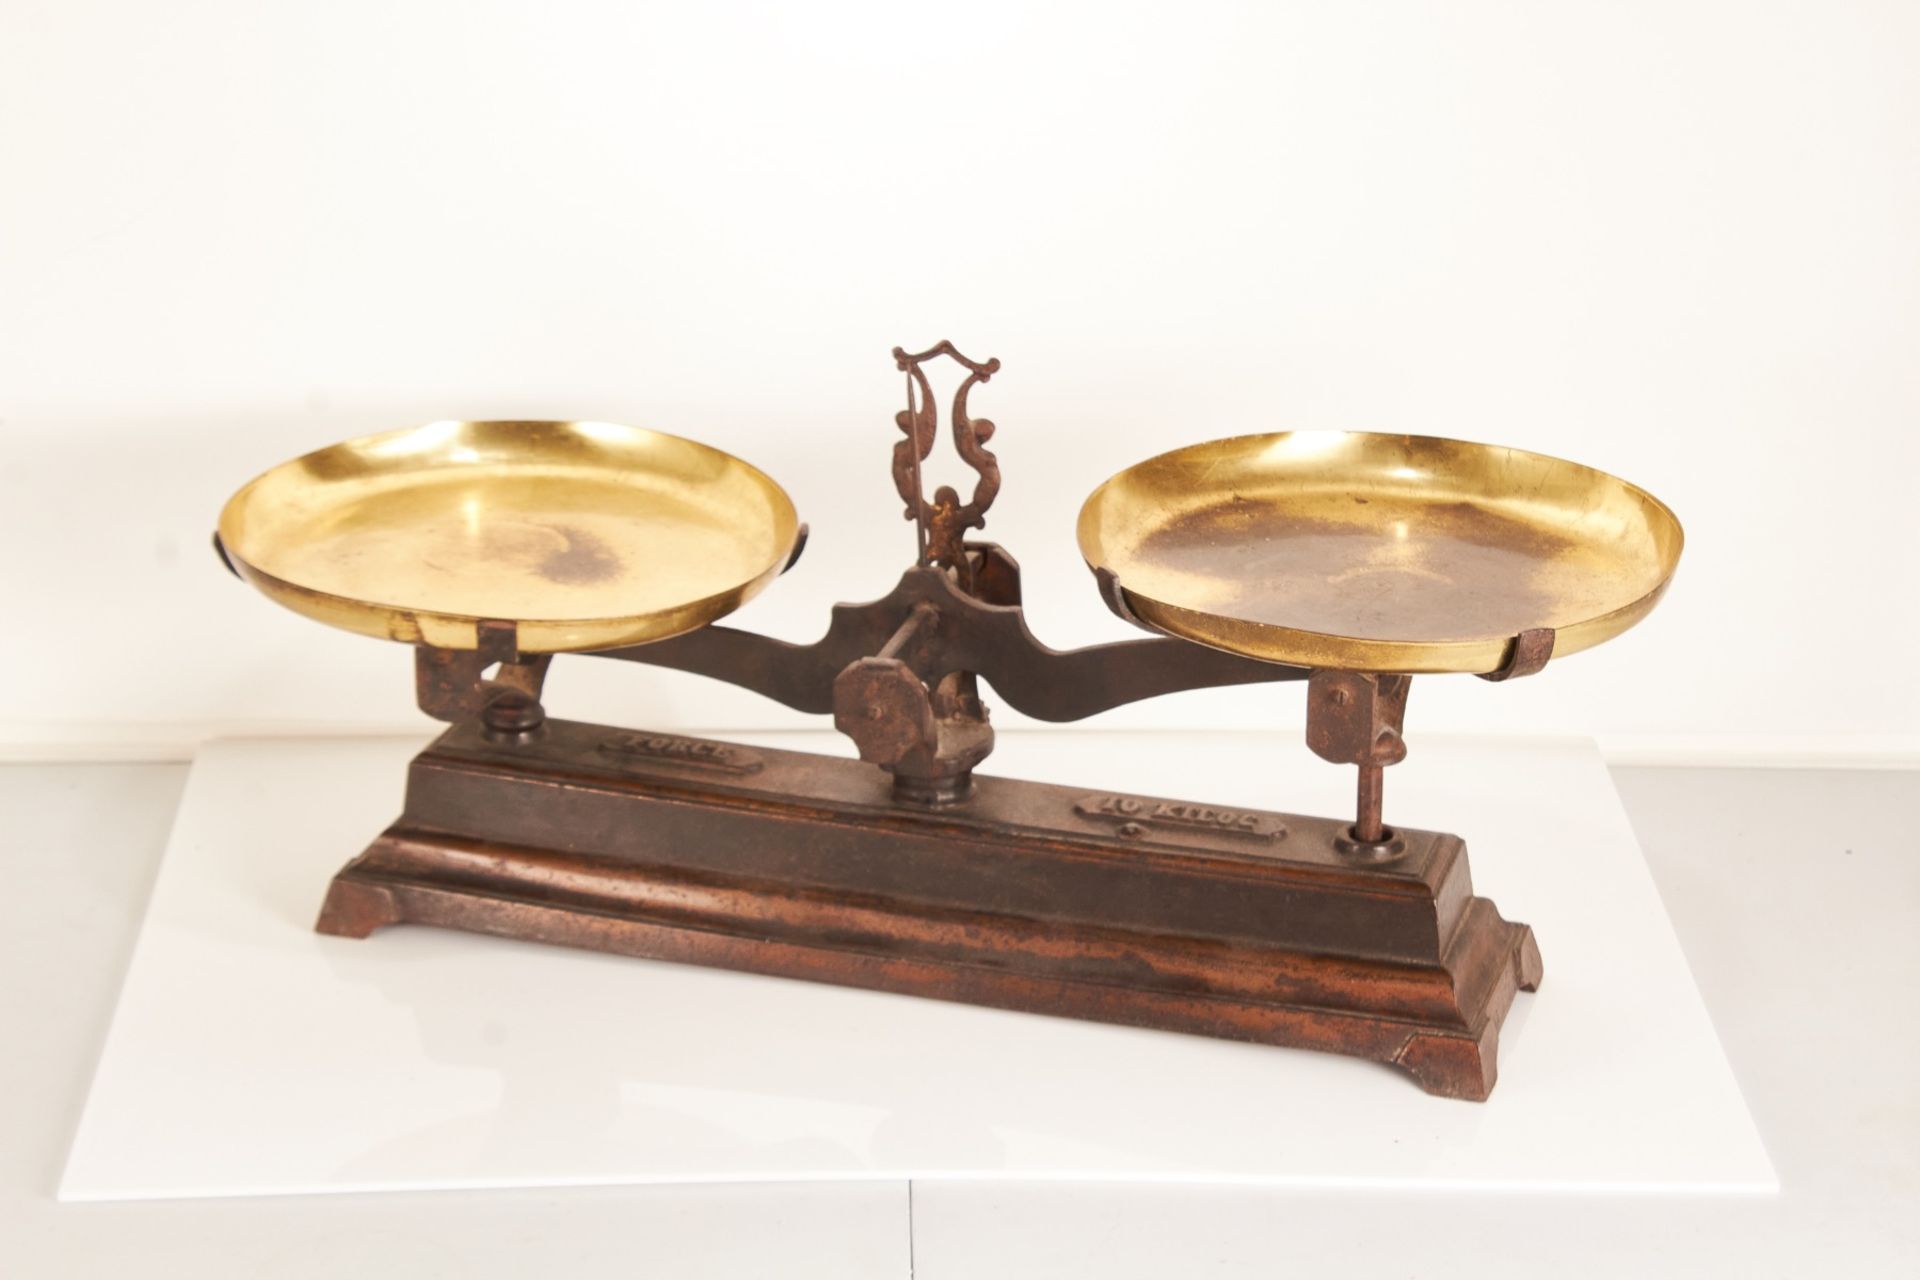 A 20th century set of cast iron weighing scales, probably American